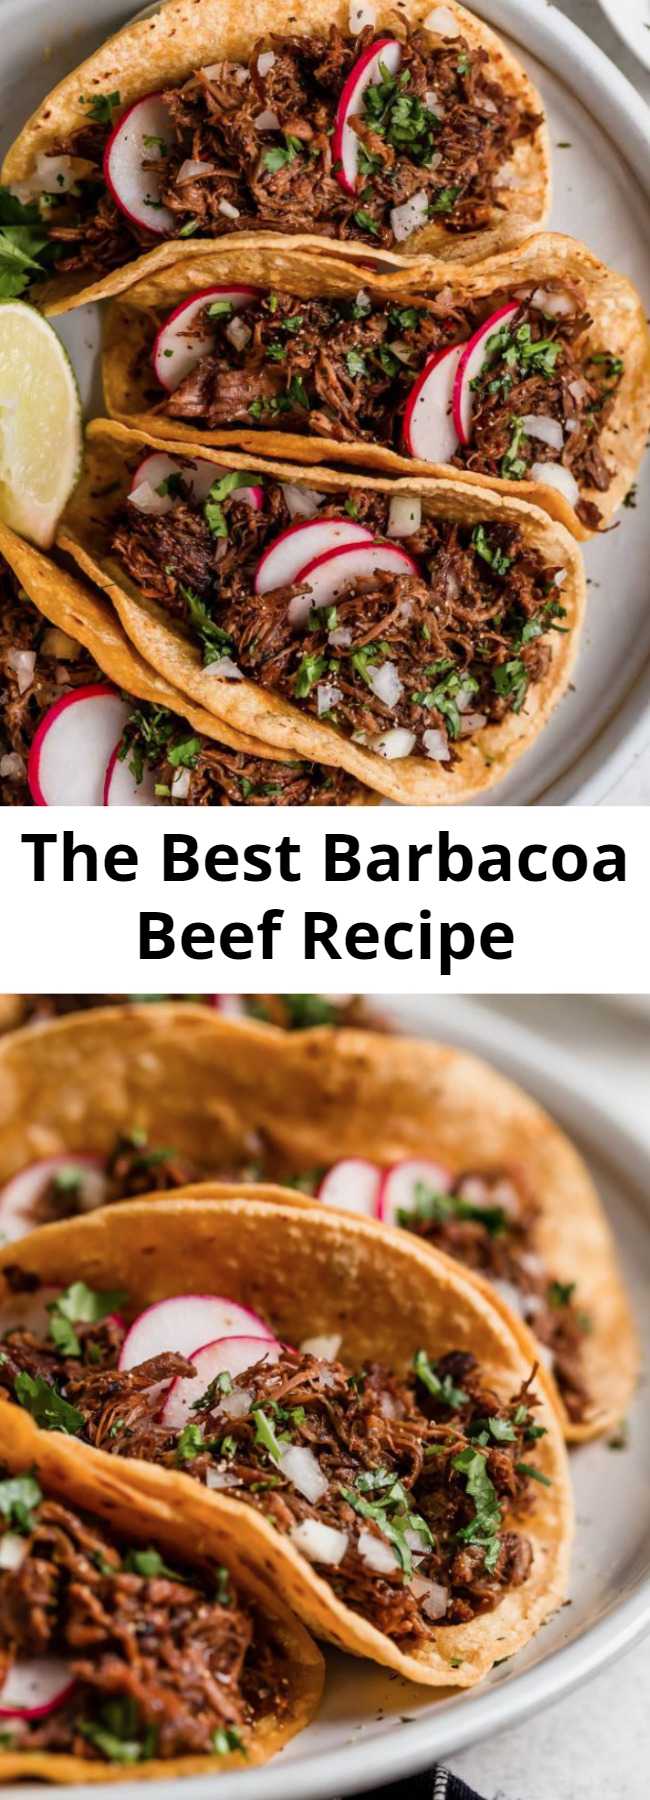 The Best Barbacoa Beef Recipe - This flavorful meat is deliciously seasoned and cooked low and slow until perfectly tender. Layer it in tortillas with all your favorite toppings for a crave-worthy dinner! #barbacoa #beef #tacos #mexicanrecipe